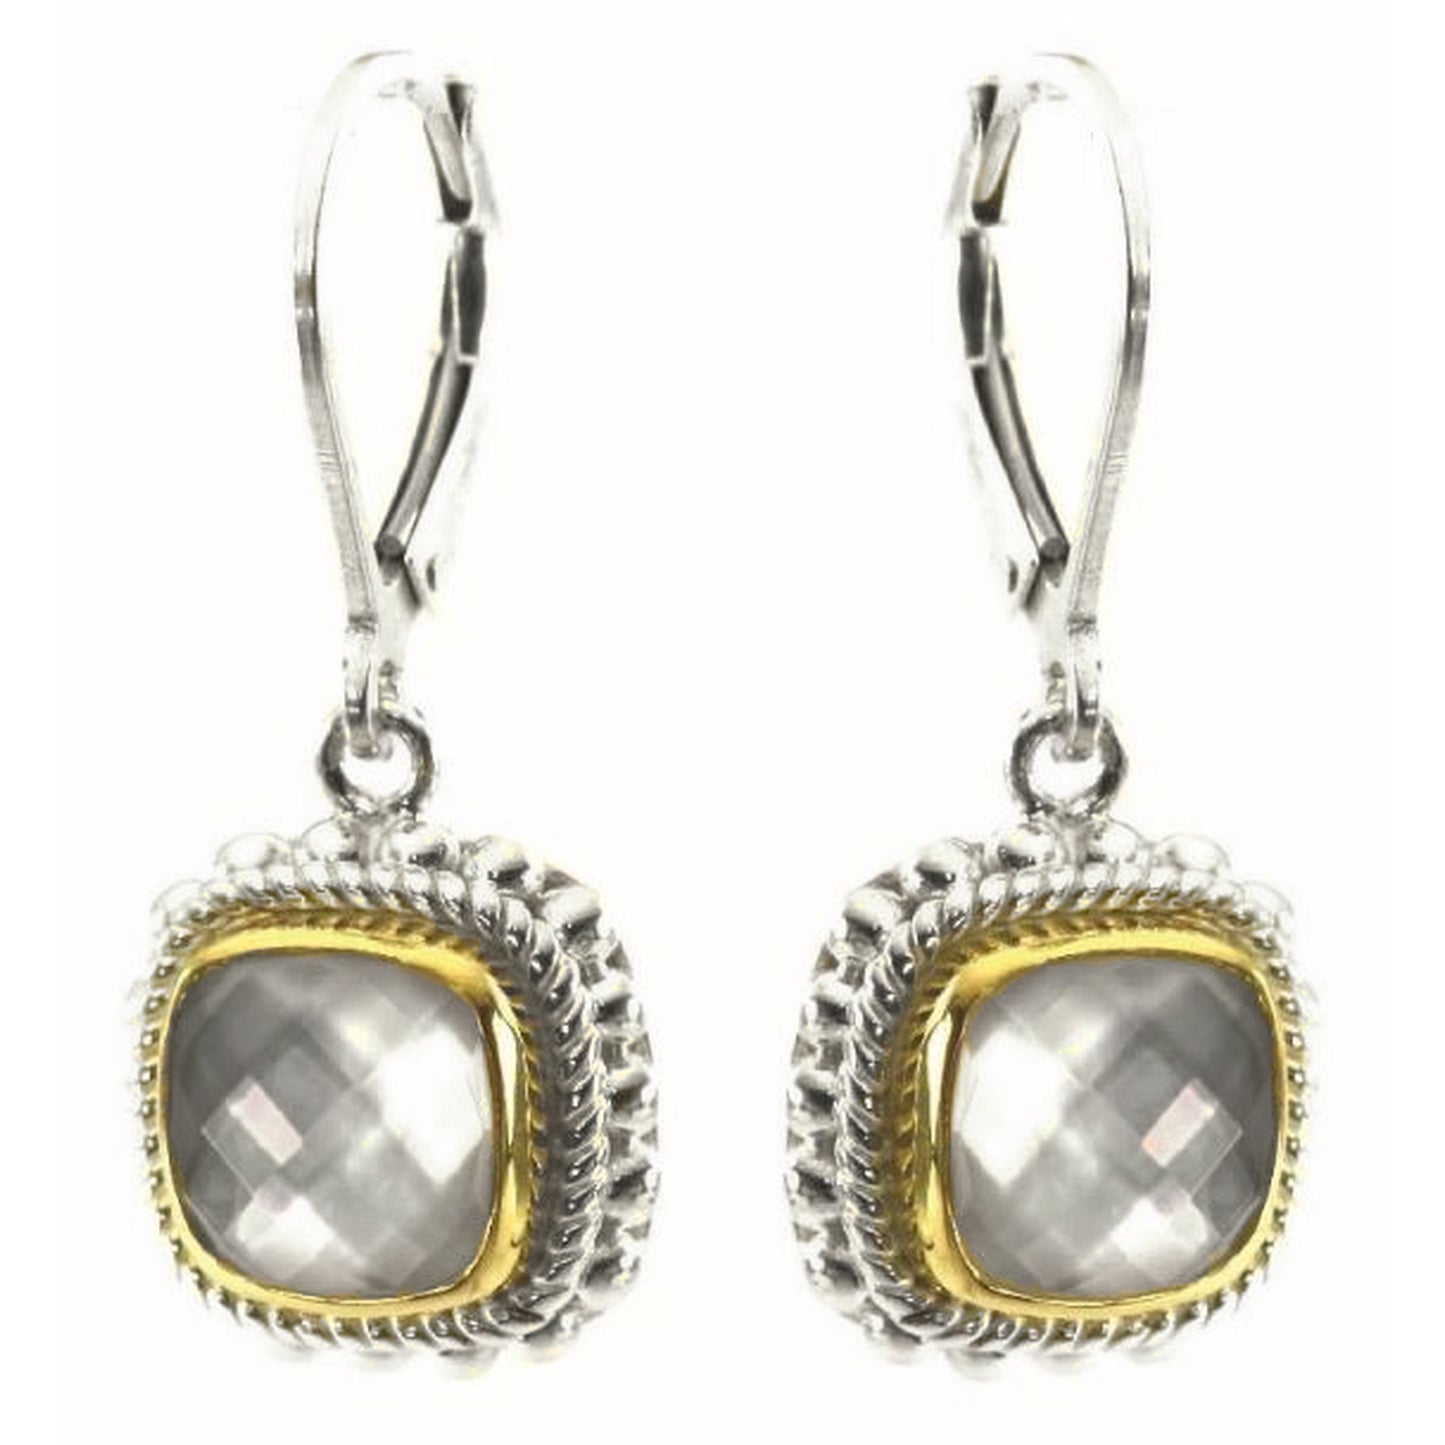 Silver and gold earrings with square mother of pearl doublet gemstones.